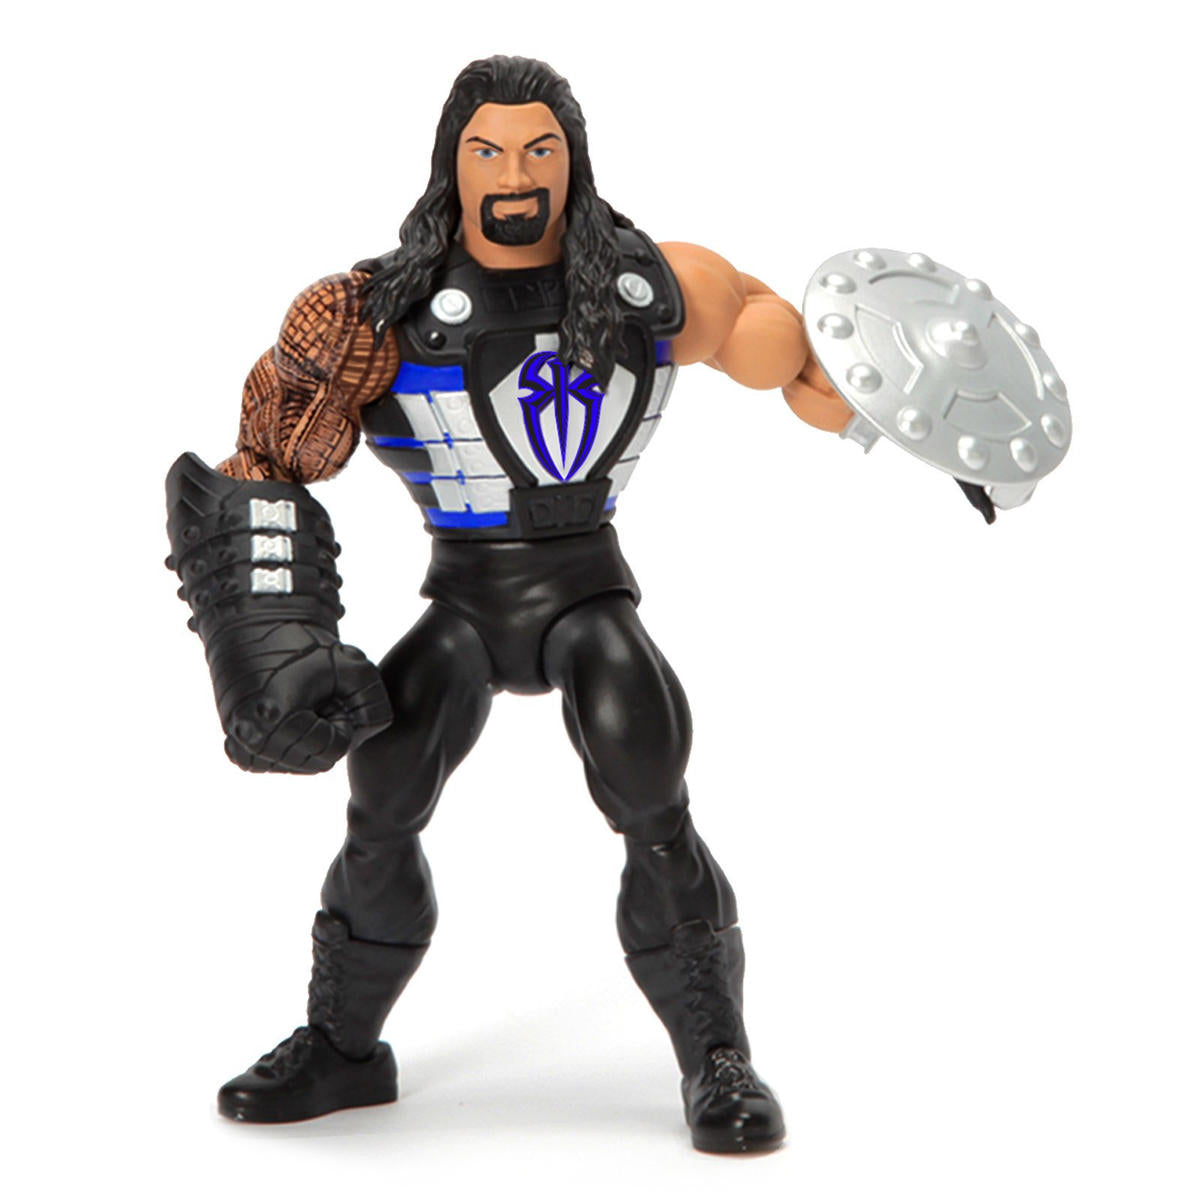 2020 Mattel Masters of the WWE Universe Series 2 Roman Reigns [Exclusive]